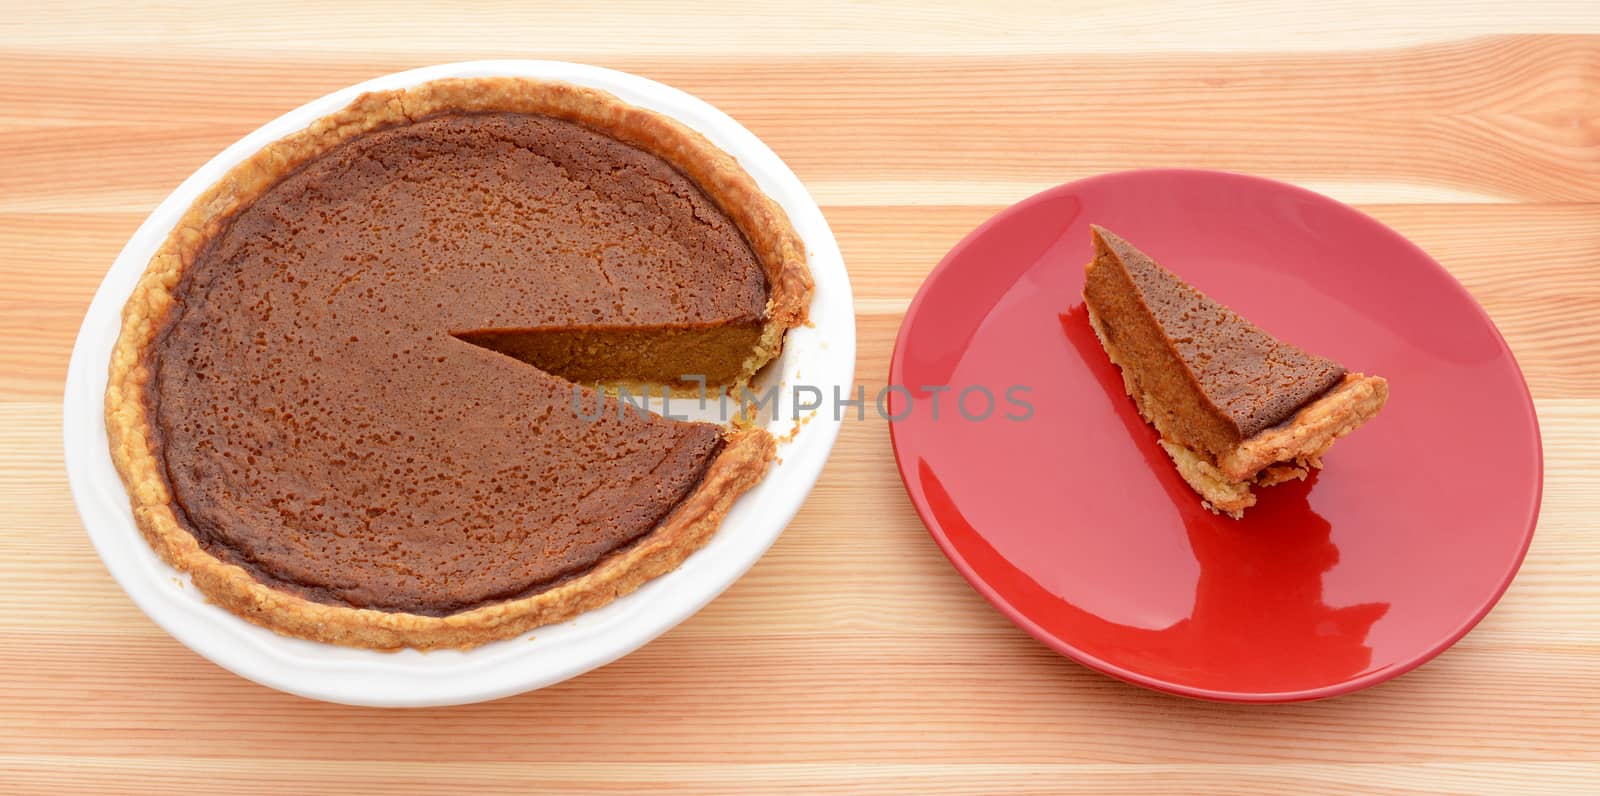 Homemade pumpkin pie with a slice served on a red plate on a wooden table